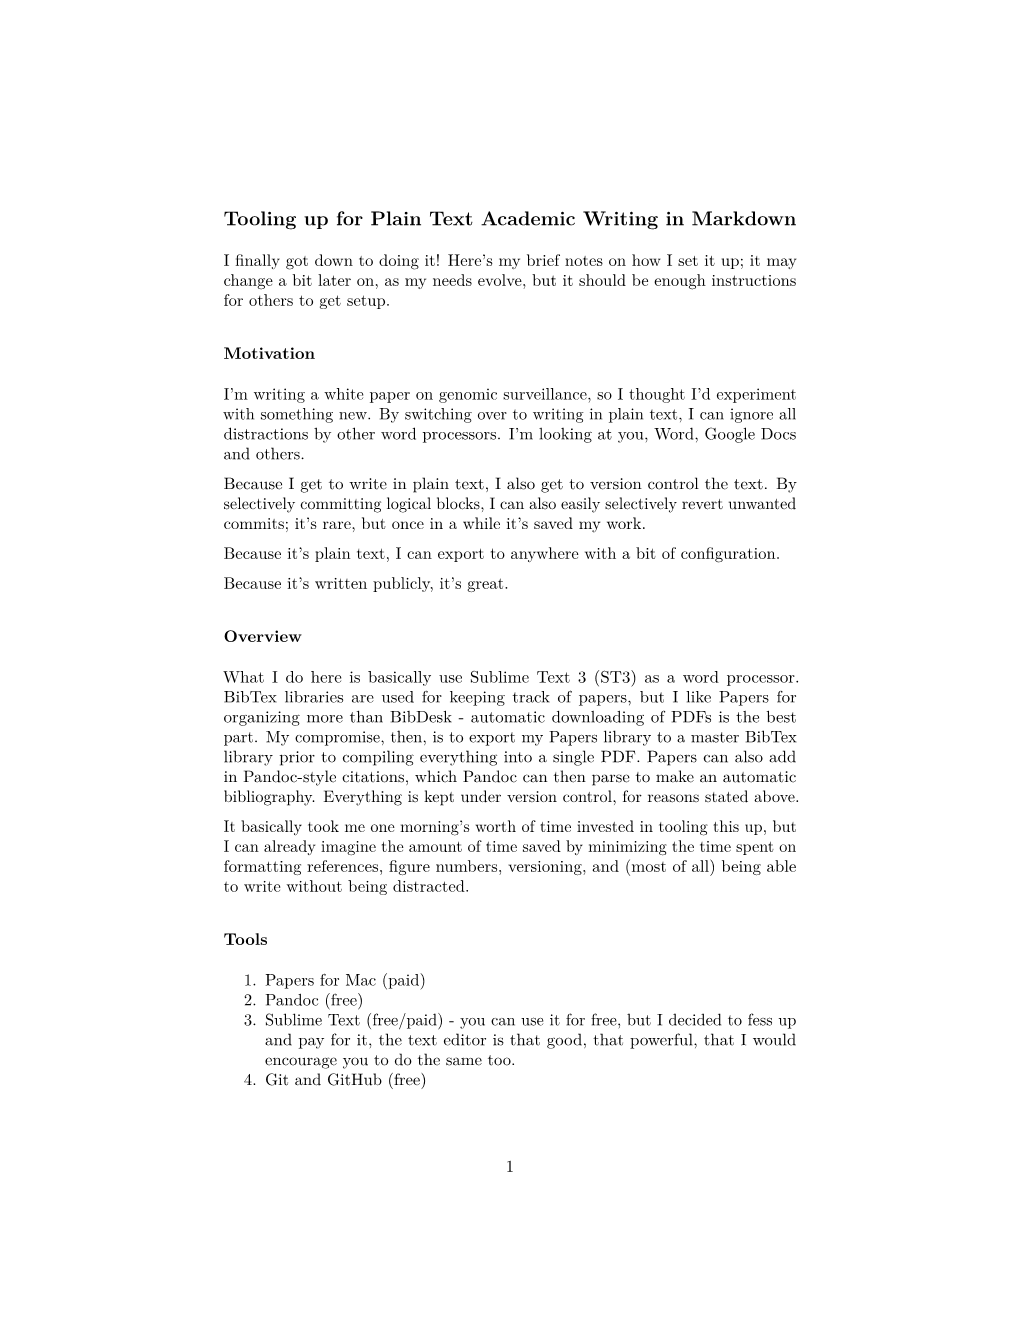 Tooling up for Plain Text Academic Writing in Markdown